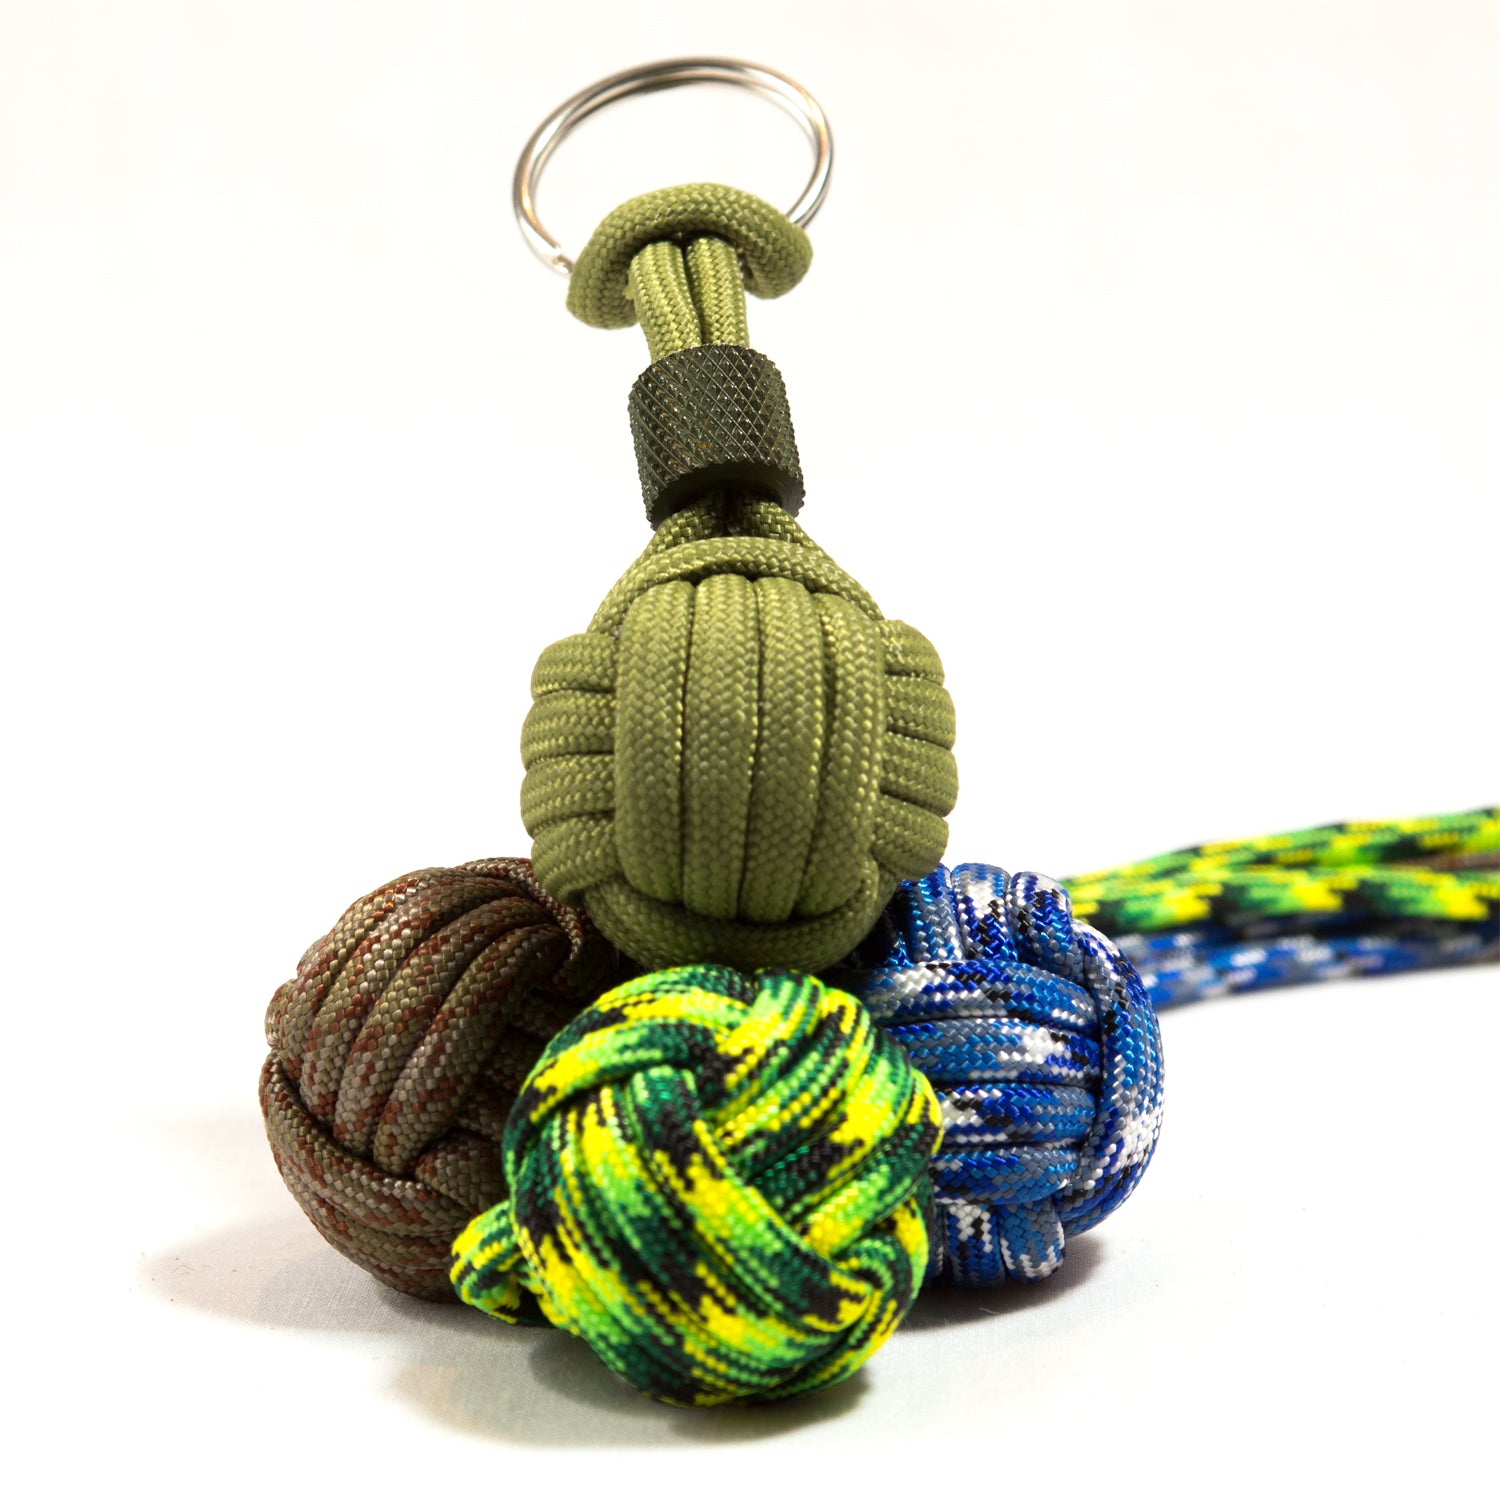 HERCULES Reflective Paracord for Survival Type III Paracord 550 Paracord  Rope Parachute Cord Green 50FT100FT 250FT Reflective - AliExpress